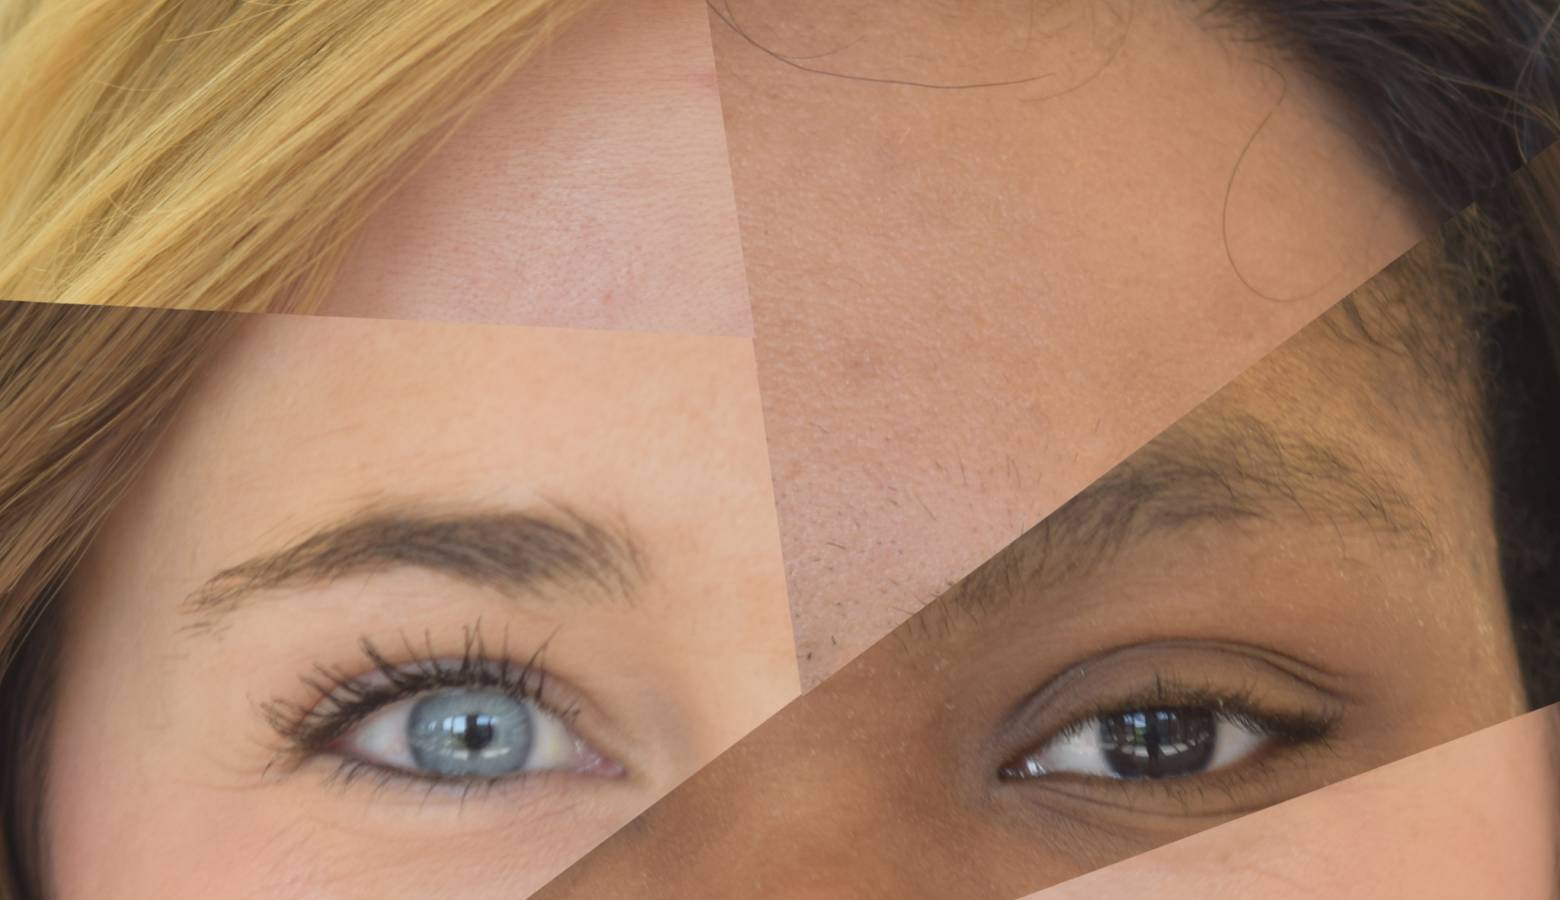 An international team has developed the HIrisPlex-S DNA test system, a tool to accurately predict eye, hair and skin color from human biological material, even a small DNA sample. (Photo courtesy of IUPUI)